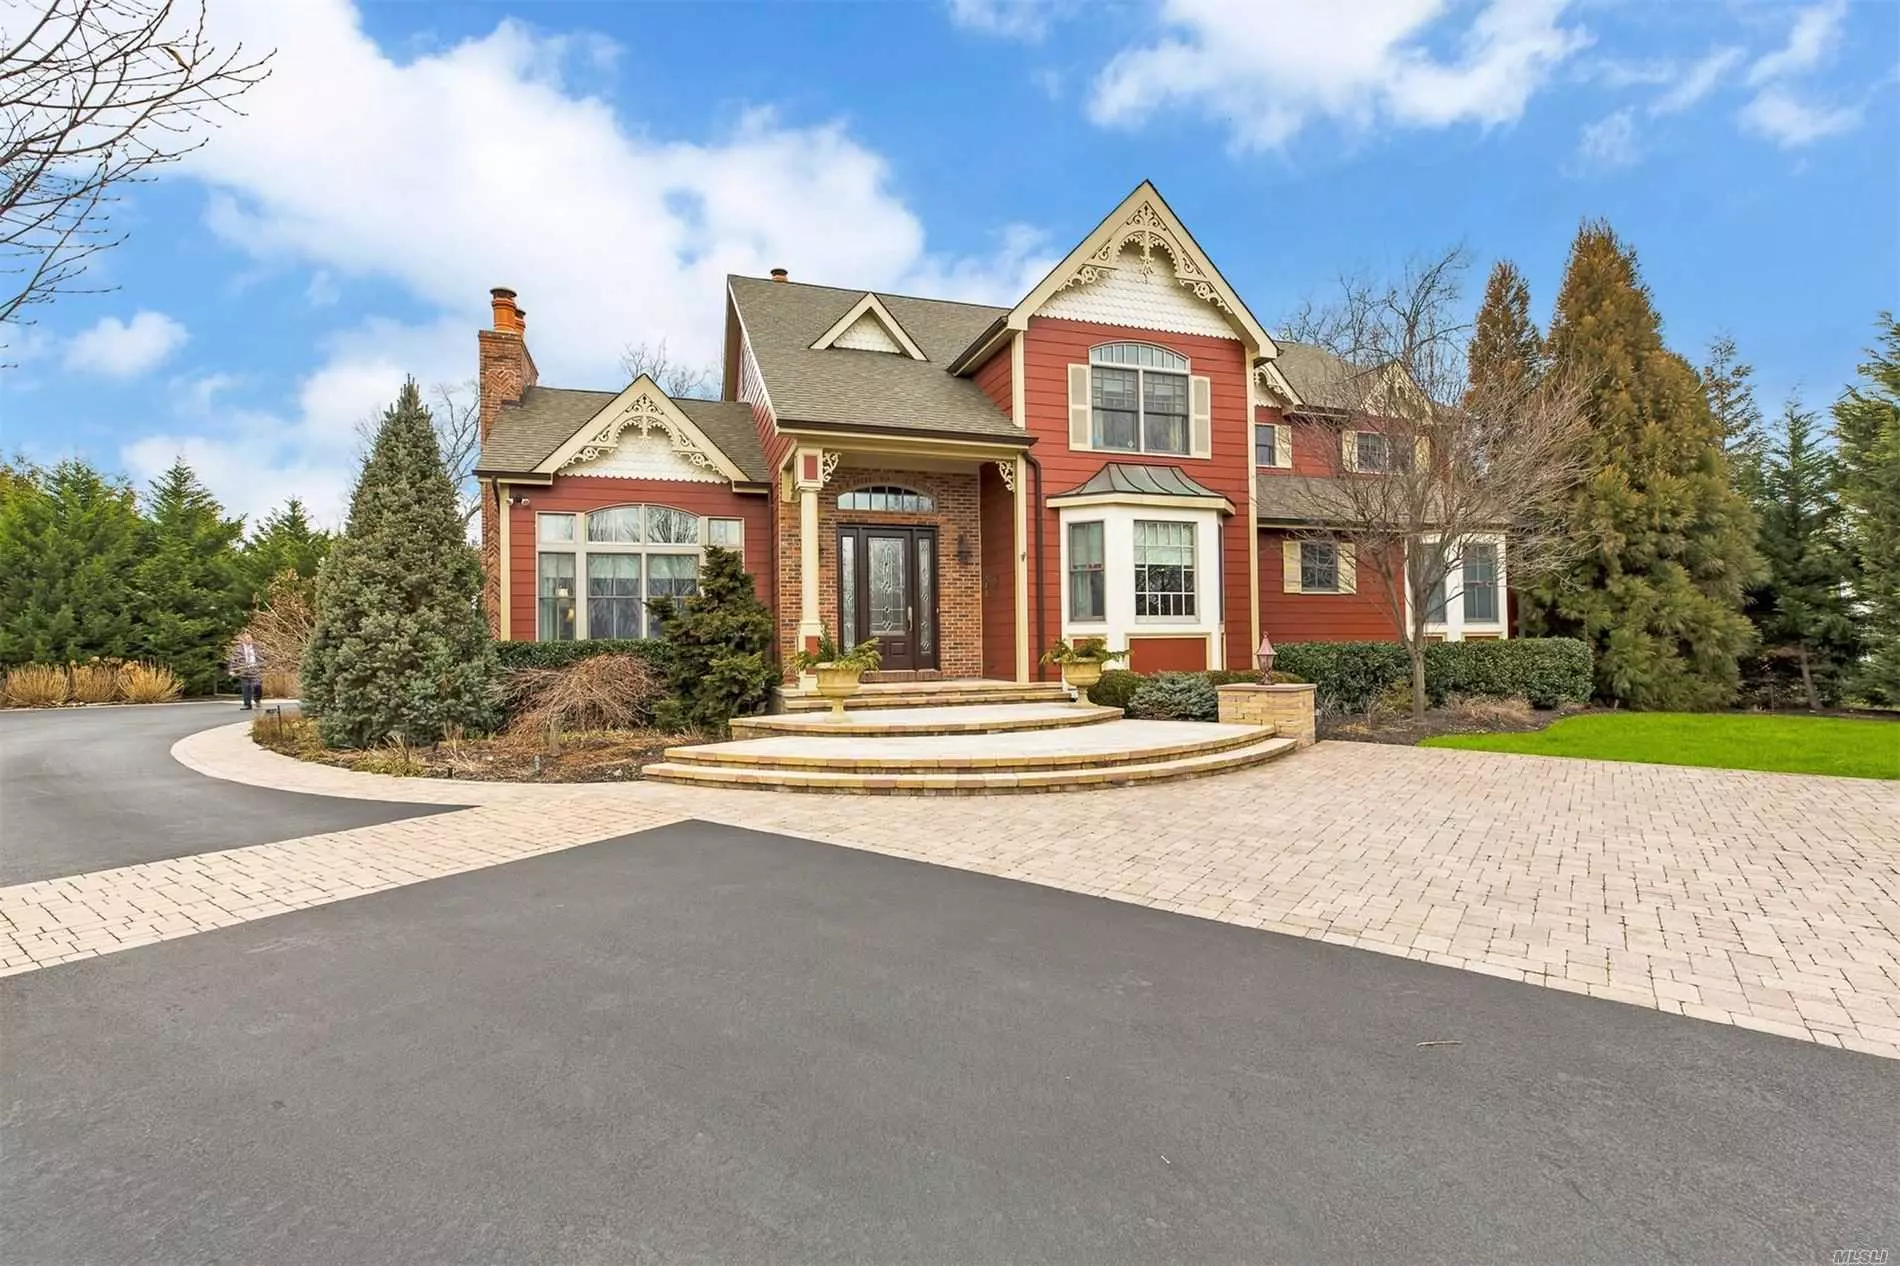 No Expense Spared! Circa 2005, 4, 271 sq.ft Vintage Style, Custom Colonial, 5 Bedrooms, 3.5 All Custom Baths, 3 Fireplaces, Story Book Two-Story Foyer, All Traditional Features, 2-Car Attached, Heated Garage, .64 Ac, Cul De Sac Location, Very Private, Well Landscaped Property, Outside Custom Fireplace, Beautiful All Stone Walkways & Patios, Chef&rsquo;s Kitchen Featured In Homes Magazine, Full Basement.